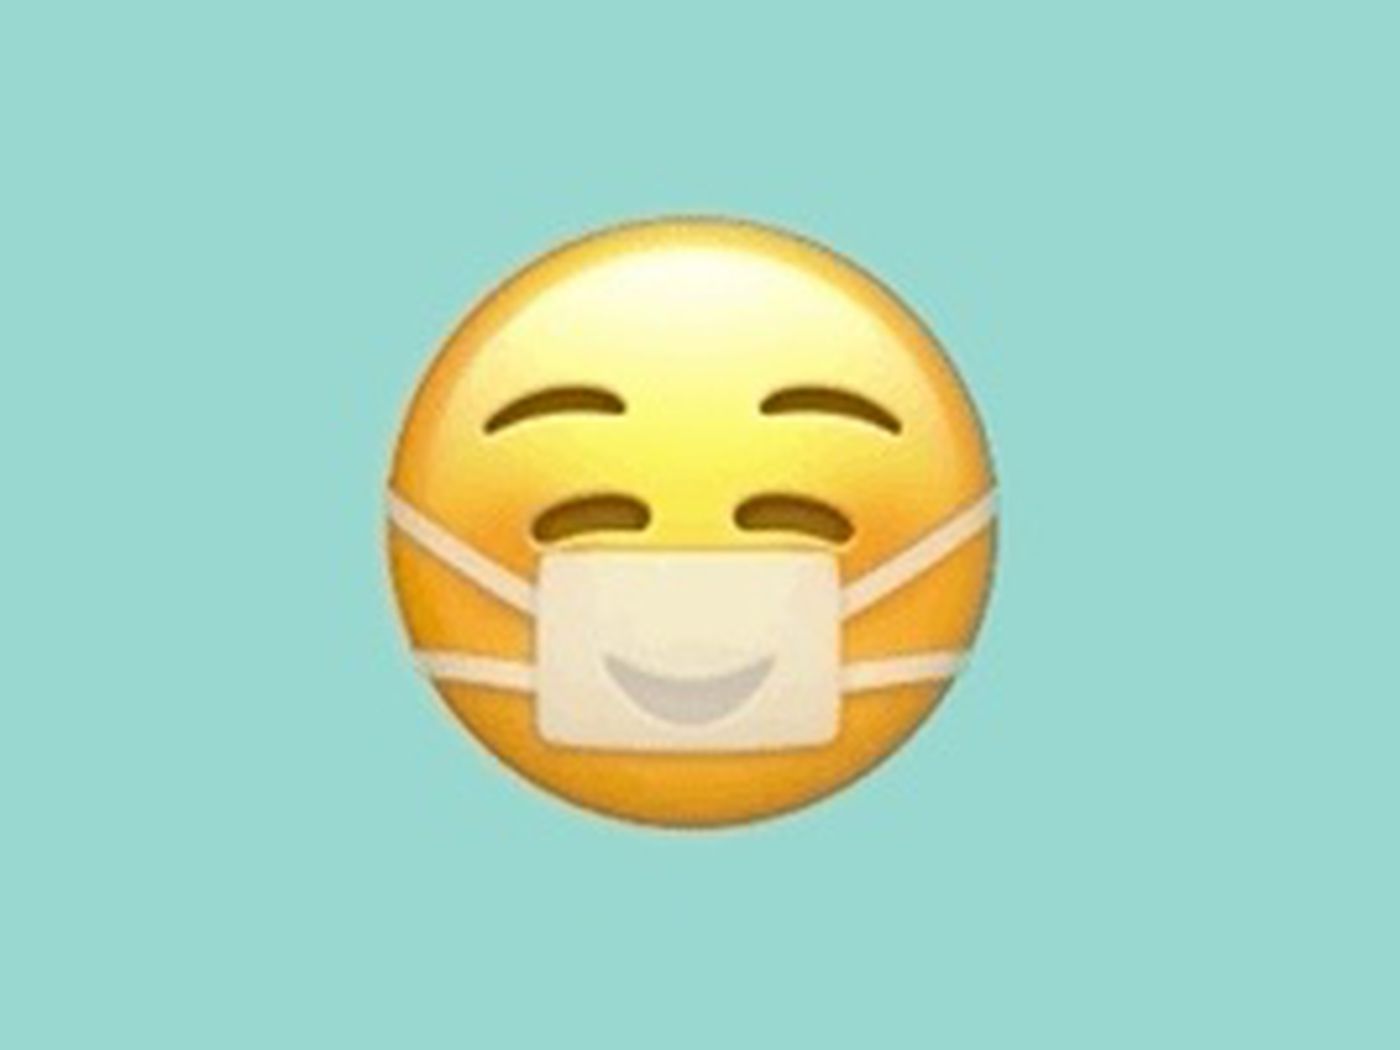 Apple is hiding a smile behind its new mask emoji